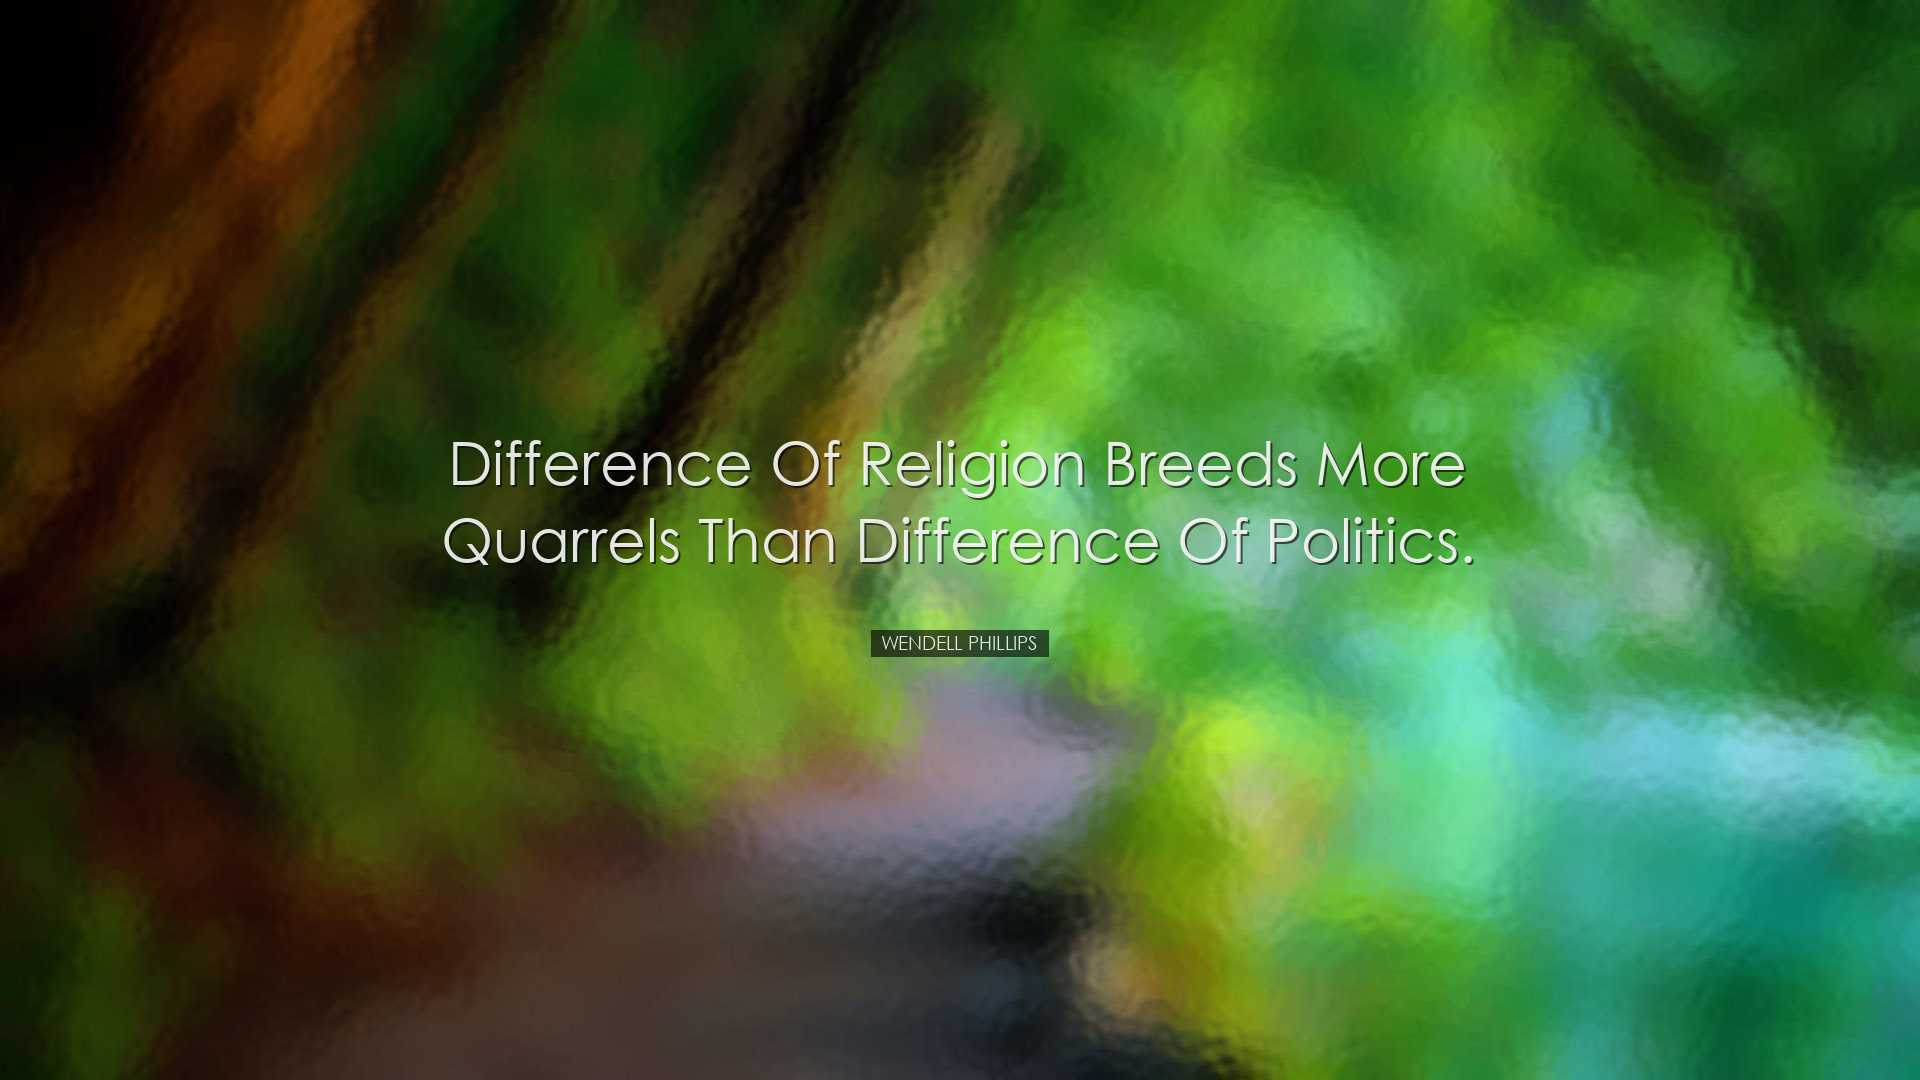 Difference of religion breeds more quarrels than difference of pol